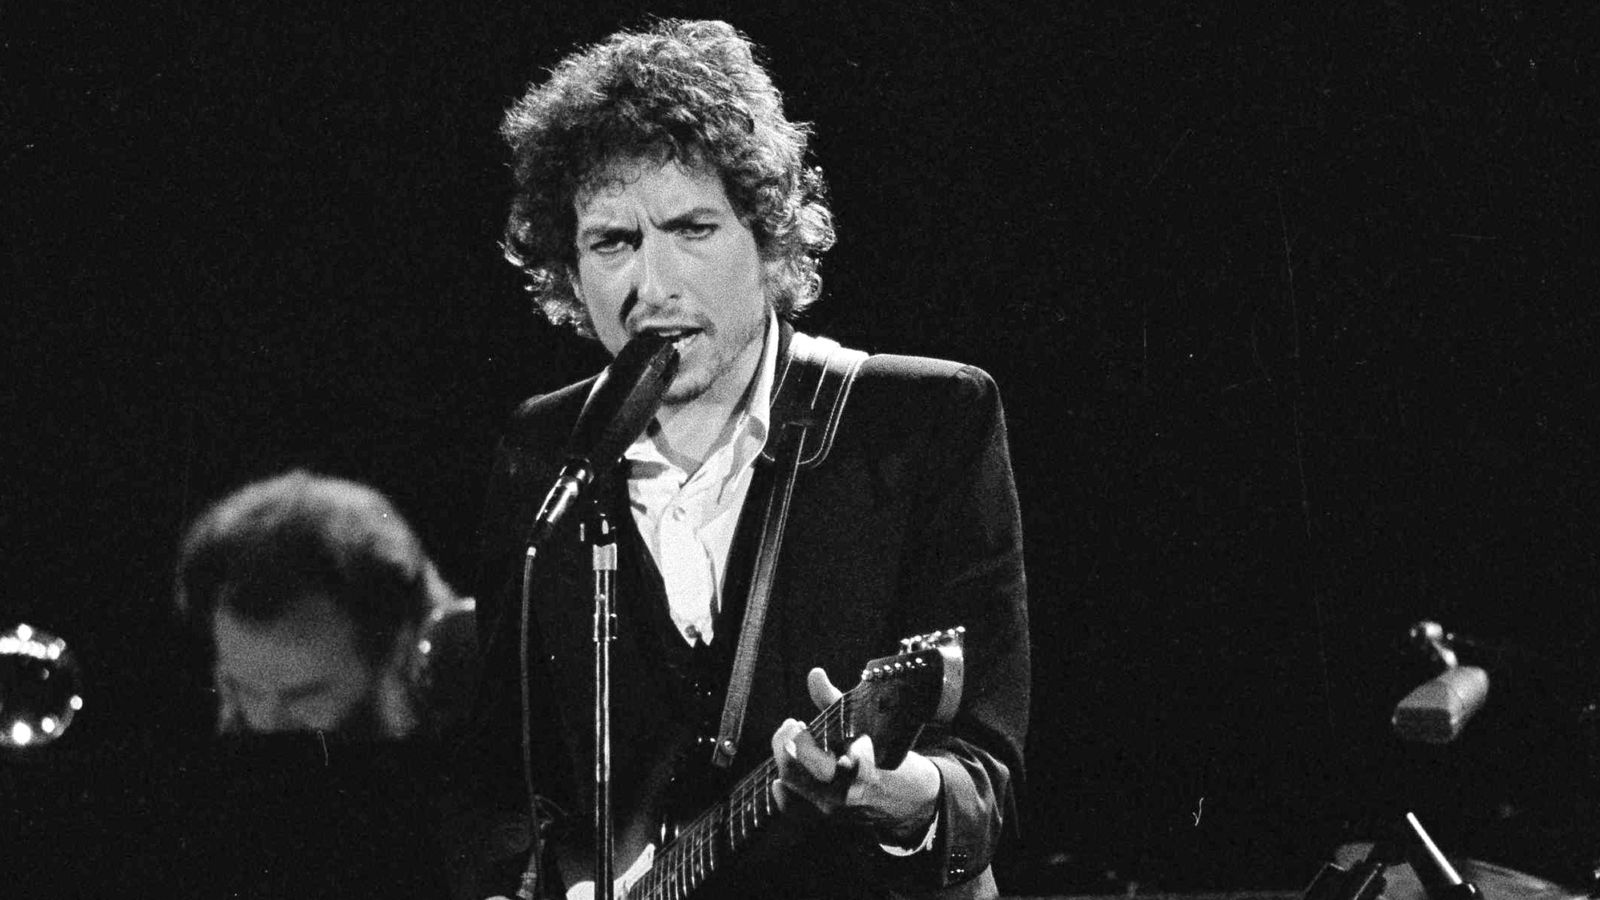 Bob Dylan’s Self Portrait record returned to Ohio library 48 years overdue